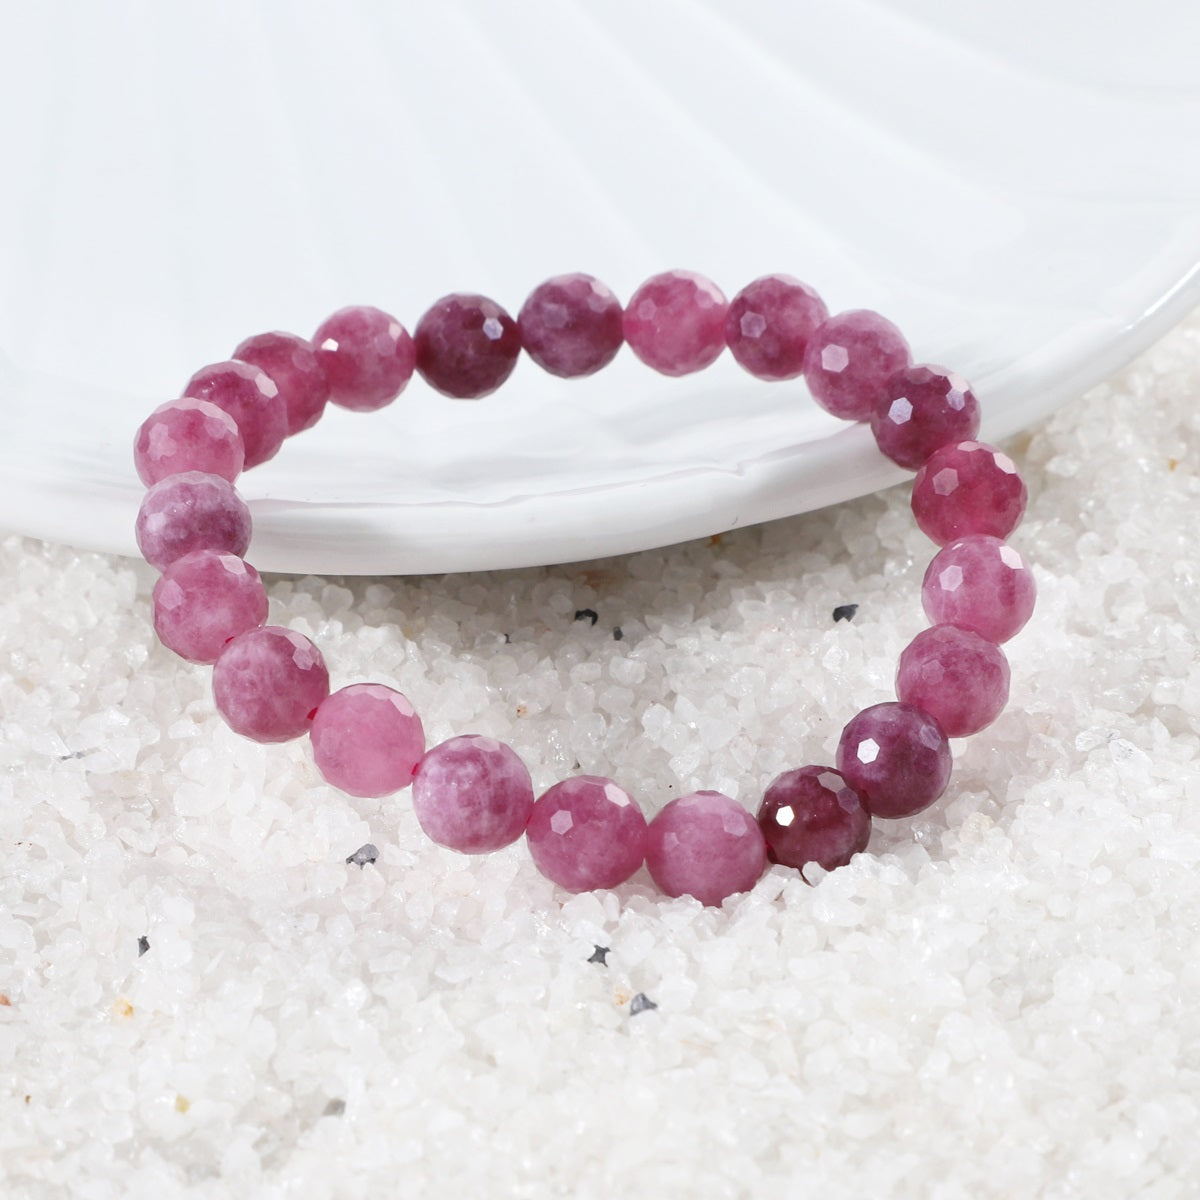 Faceted round Pink Quartz stones in the bracelet, reflecting light and adding sophistication to your ensemble